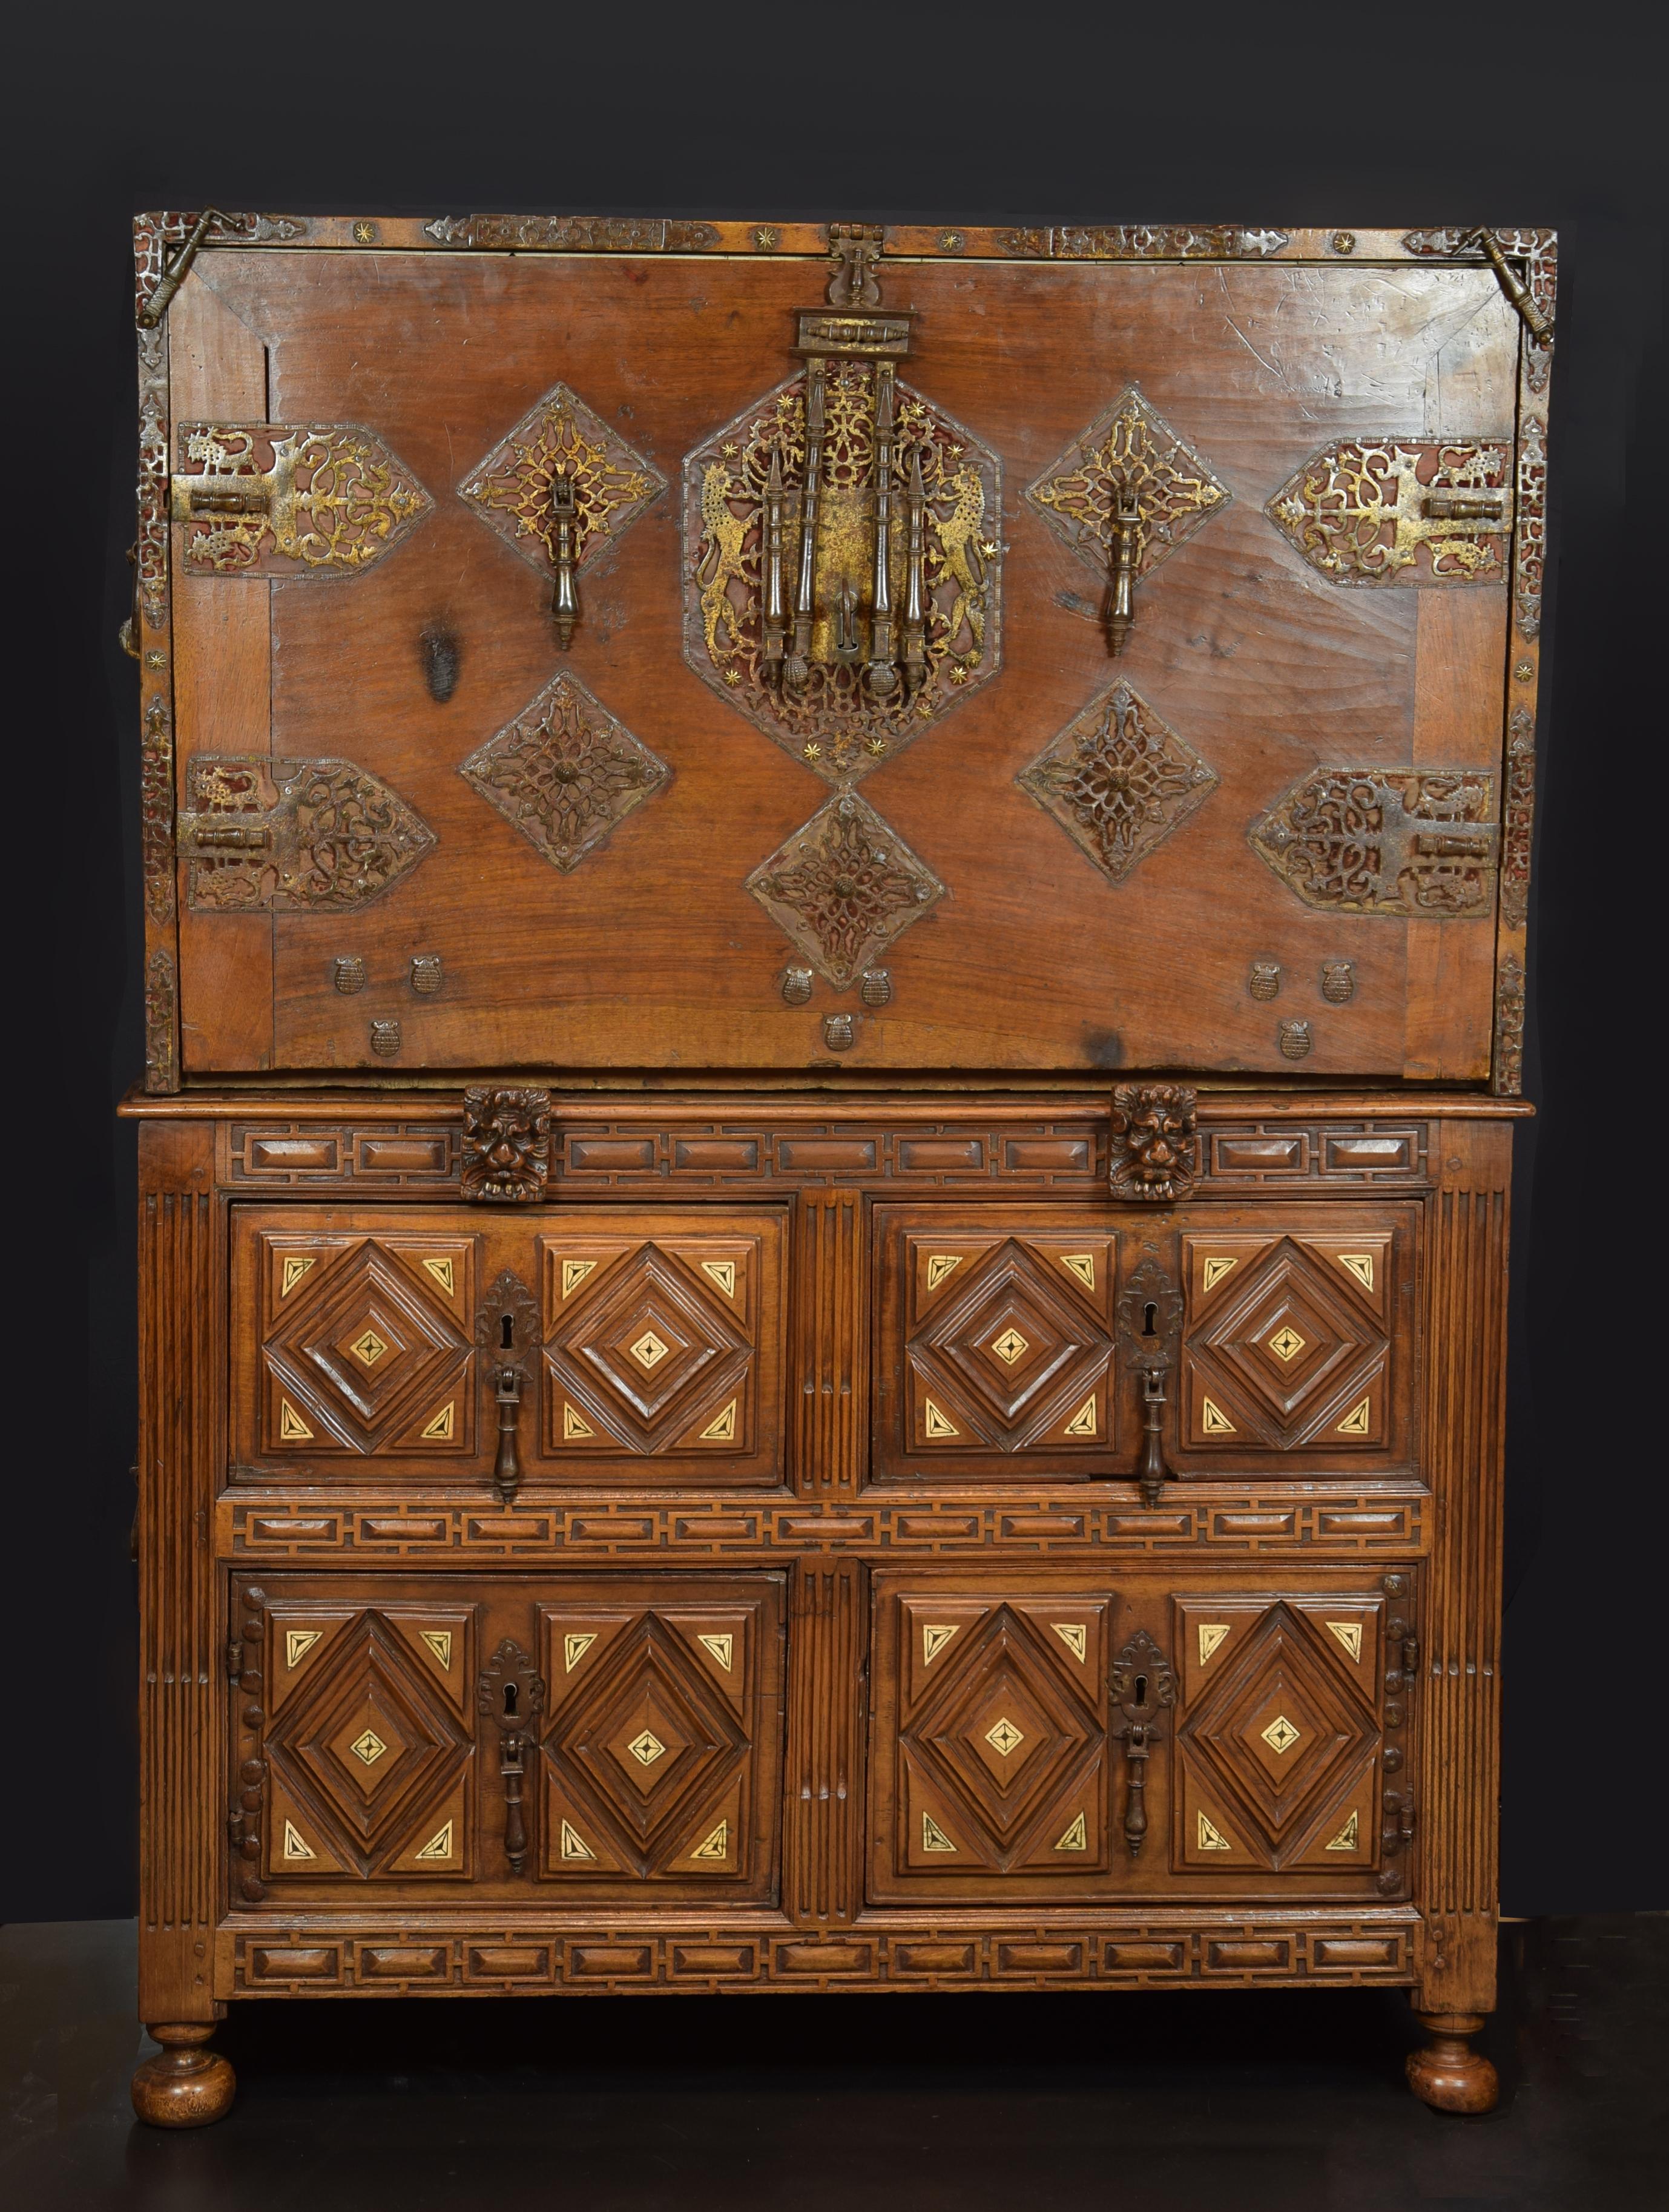 The rectangular locker rests on four round legs, and has four drawers decorated with diamonds that lock and fittings and shield shown horseshoe. Desk, hinged front cover has metal hooks (to attach the table without lock) and numerous decorative